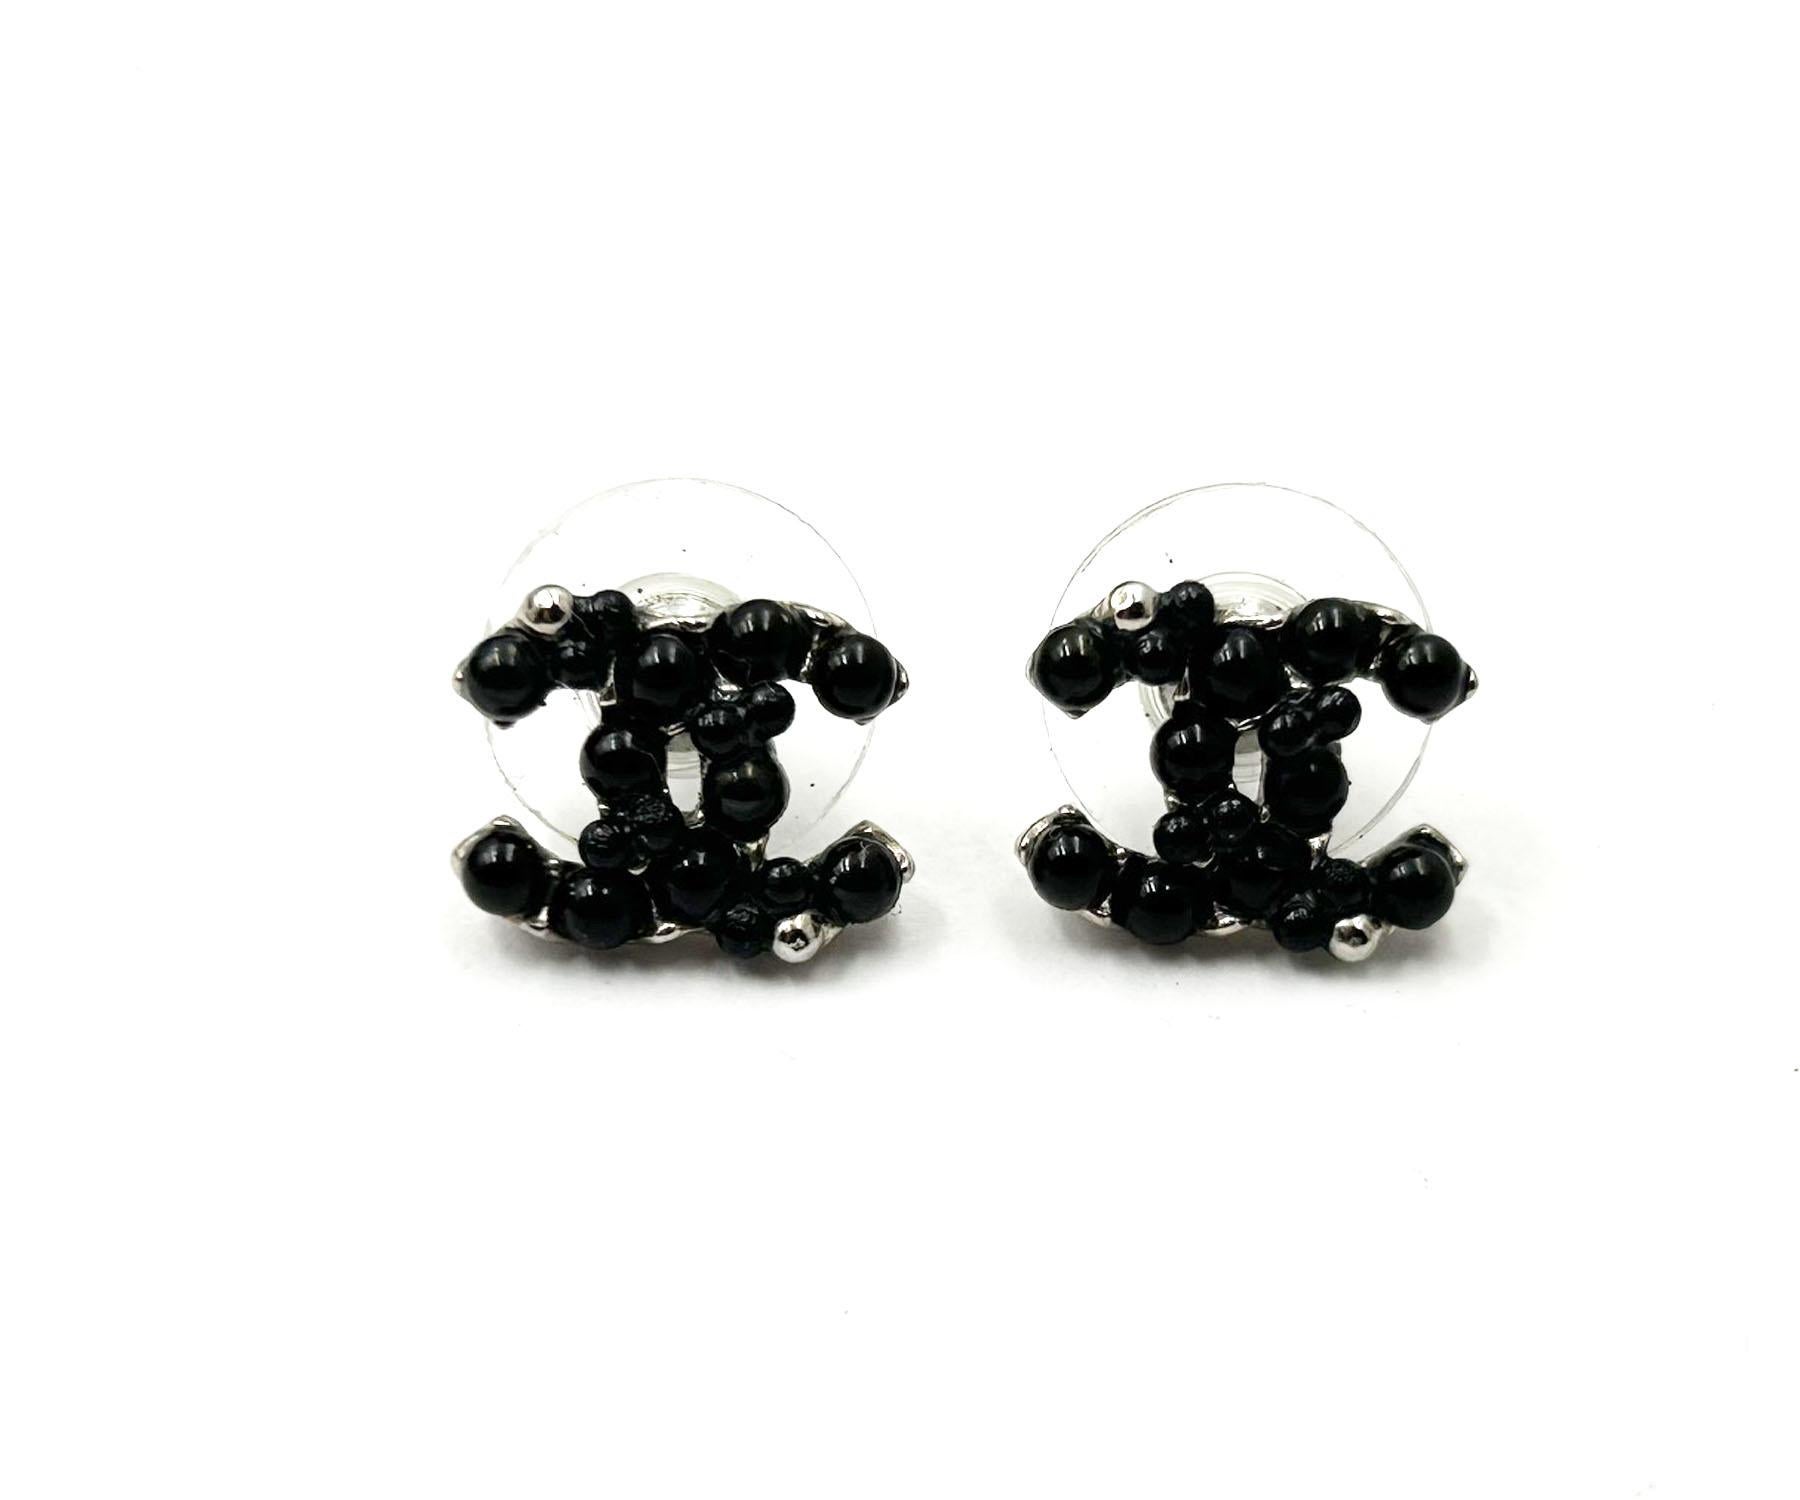 Chanel Silver CC Black Bead Piercing Earrings

* Marked 14
* Made in France
*Comes with original pouch and box

-It is approximately 0.5